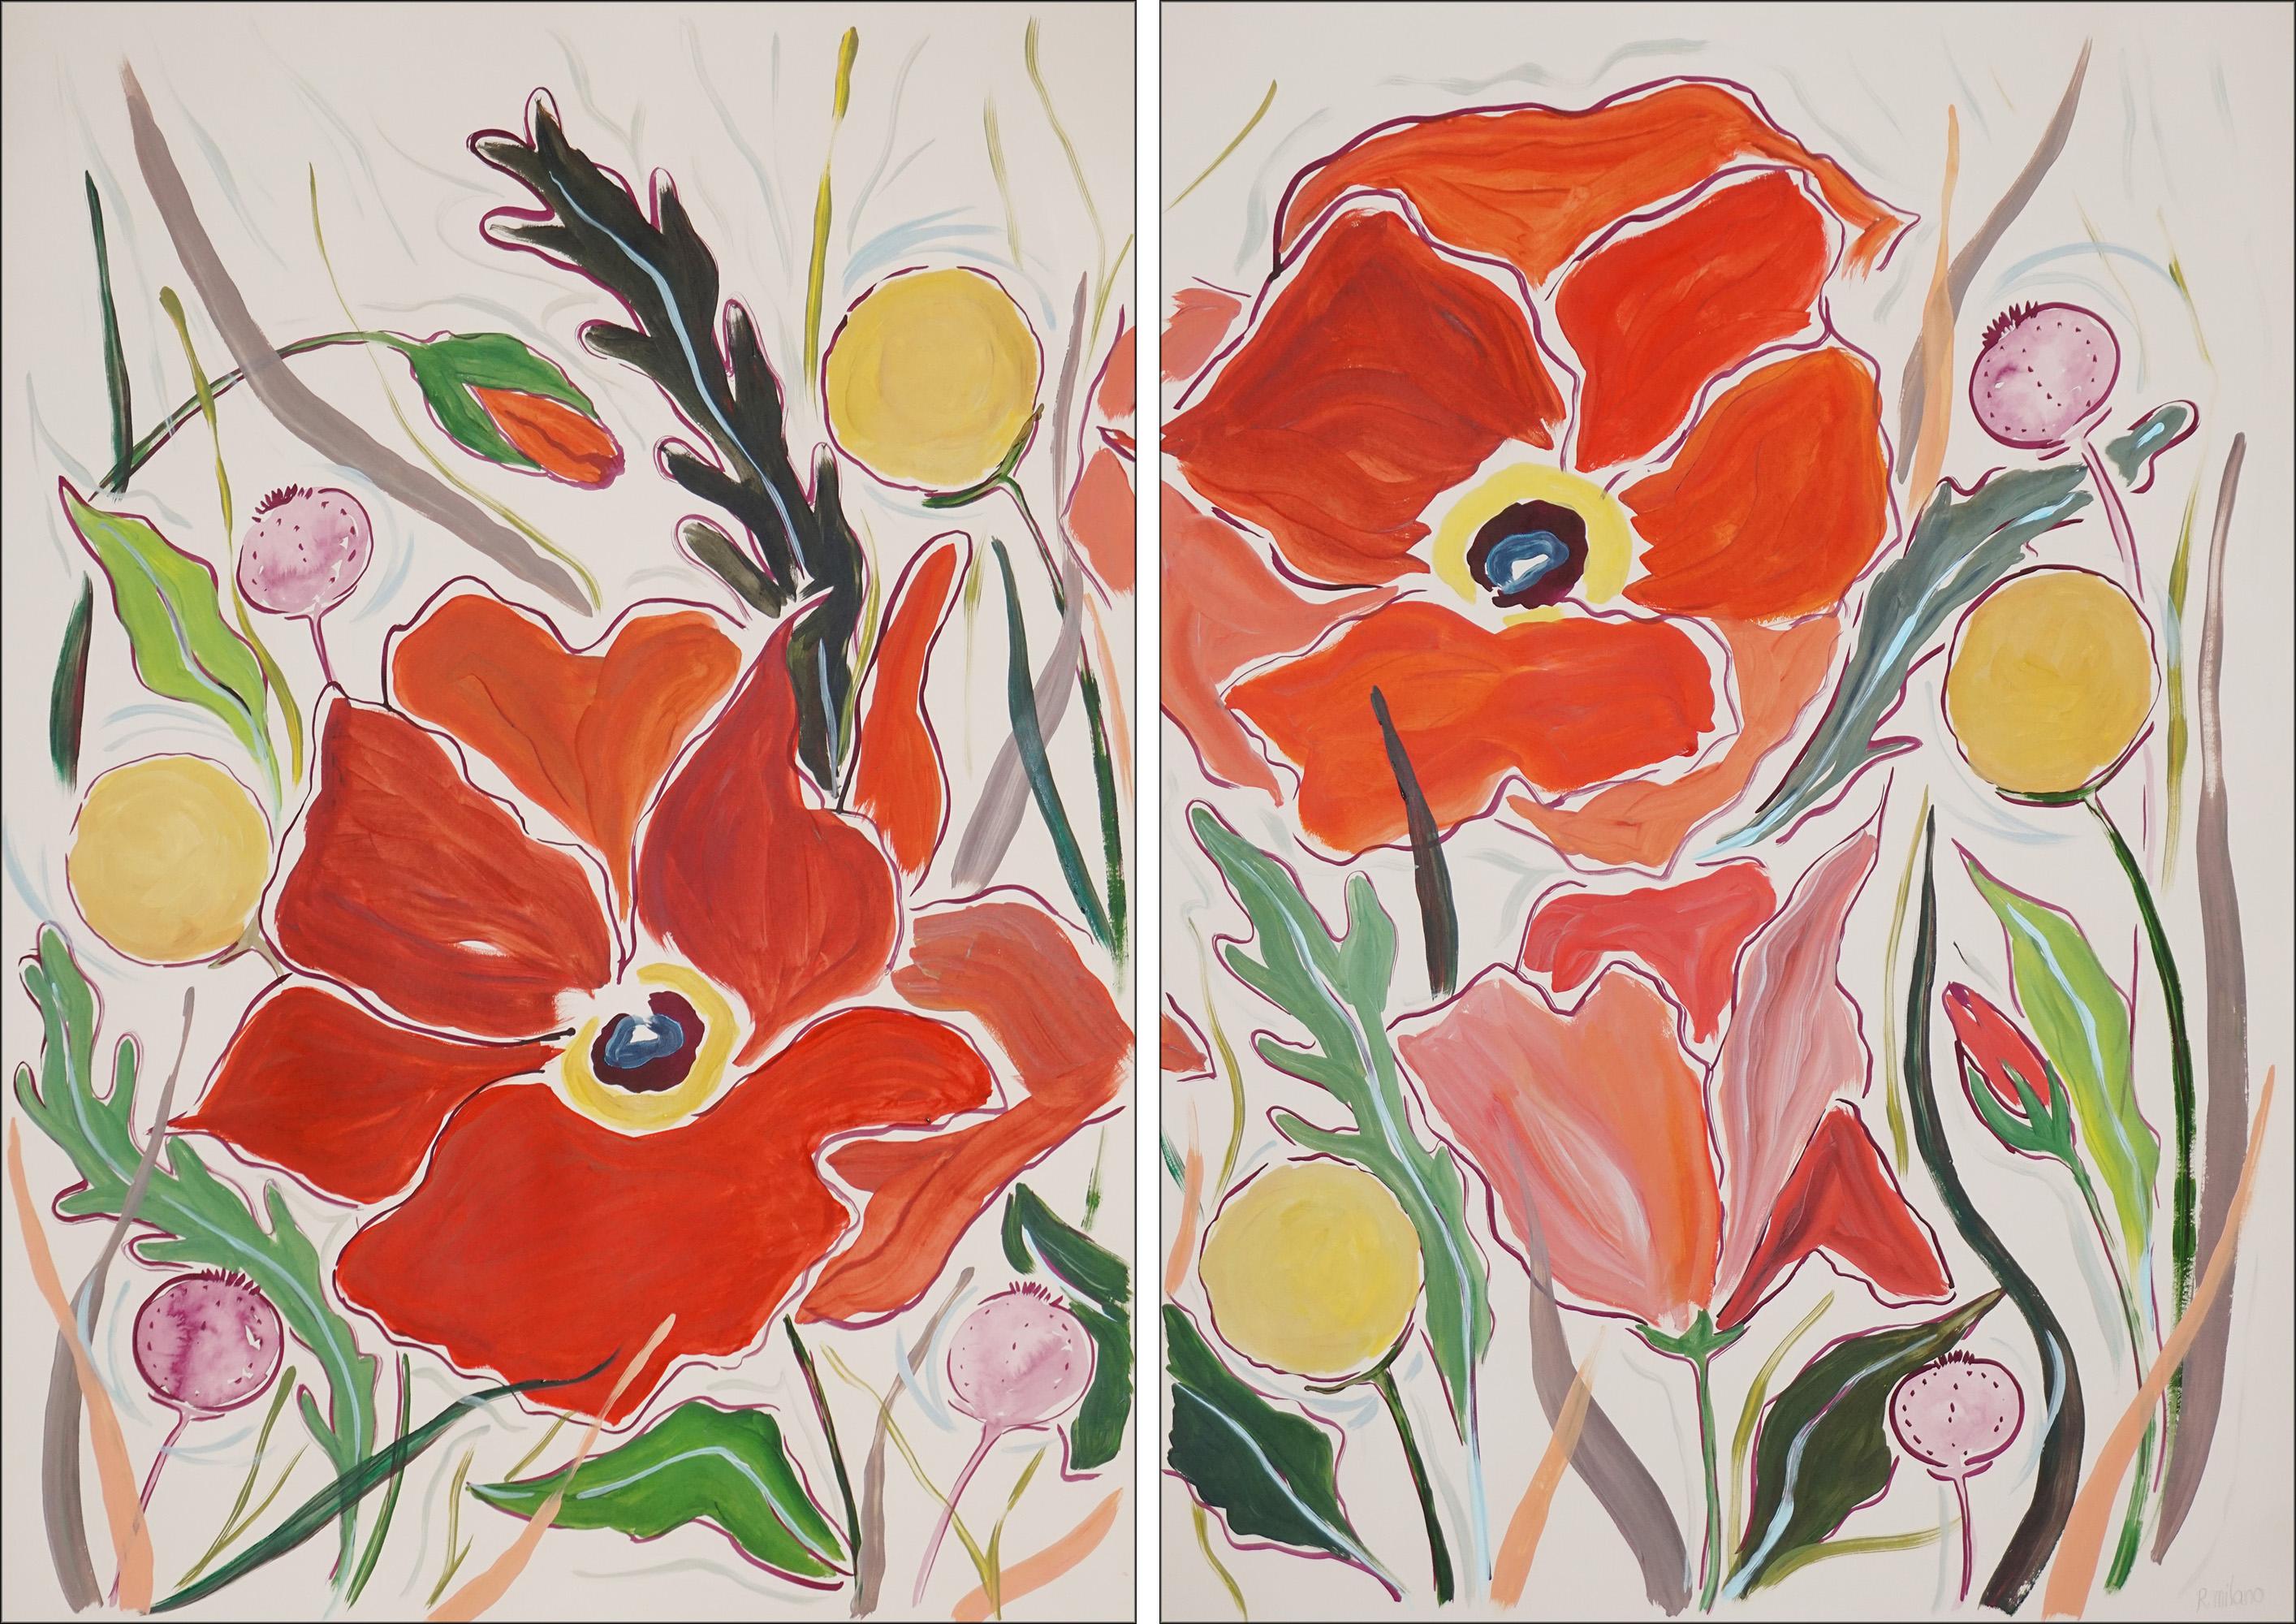 Romina Milano Landscape Painting - Large Red Poppy Flowers Diptych with Yellow Wild Craspedia Bloom, Illustration 